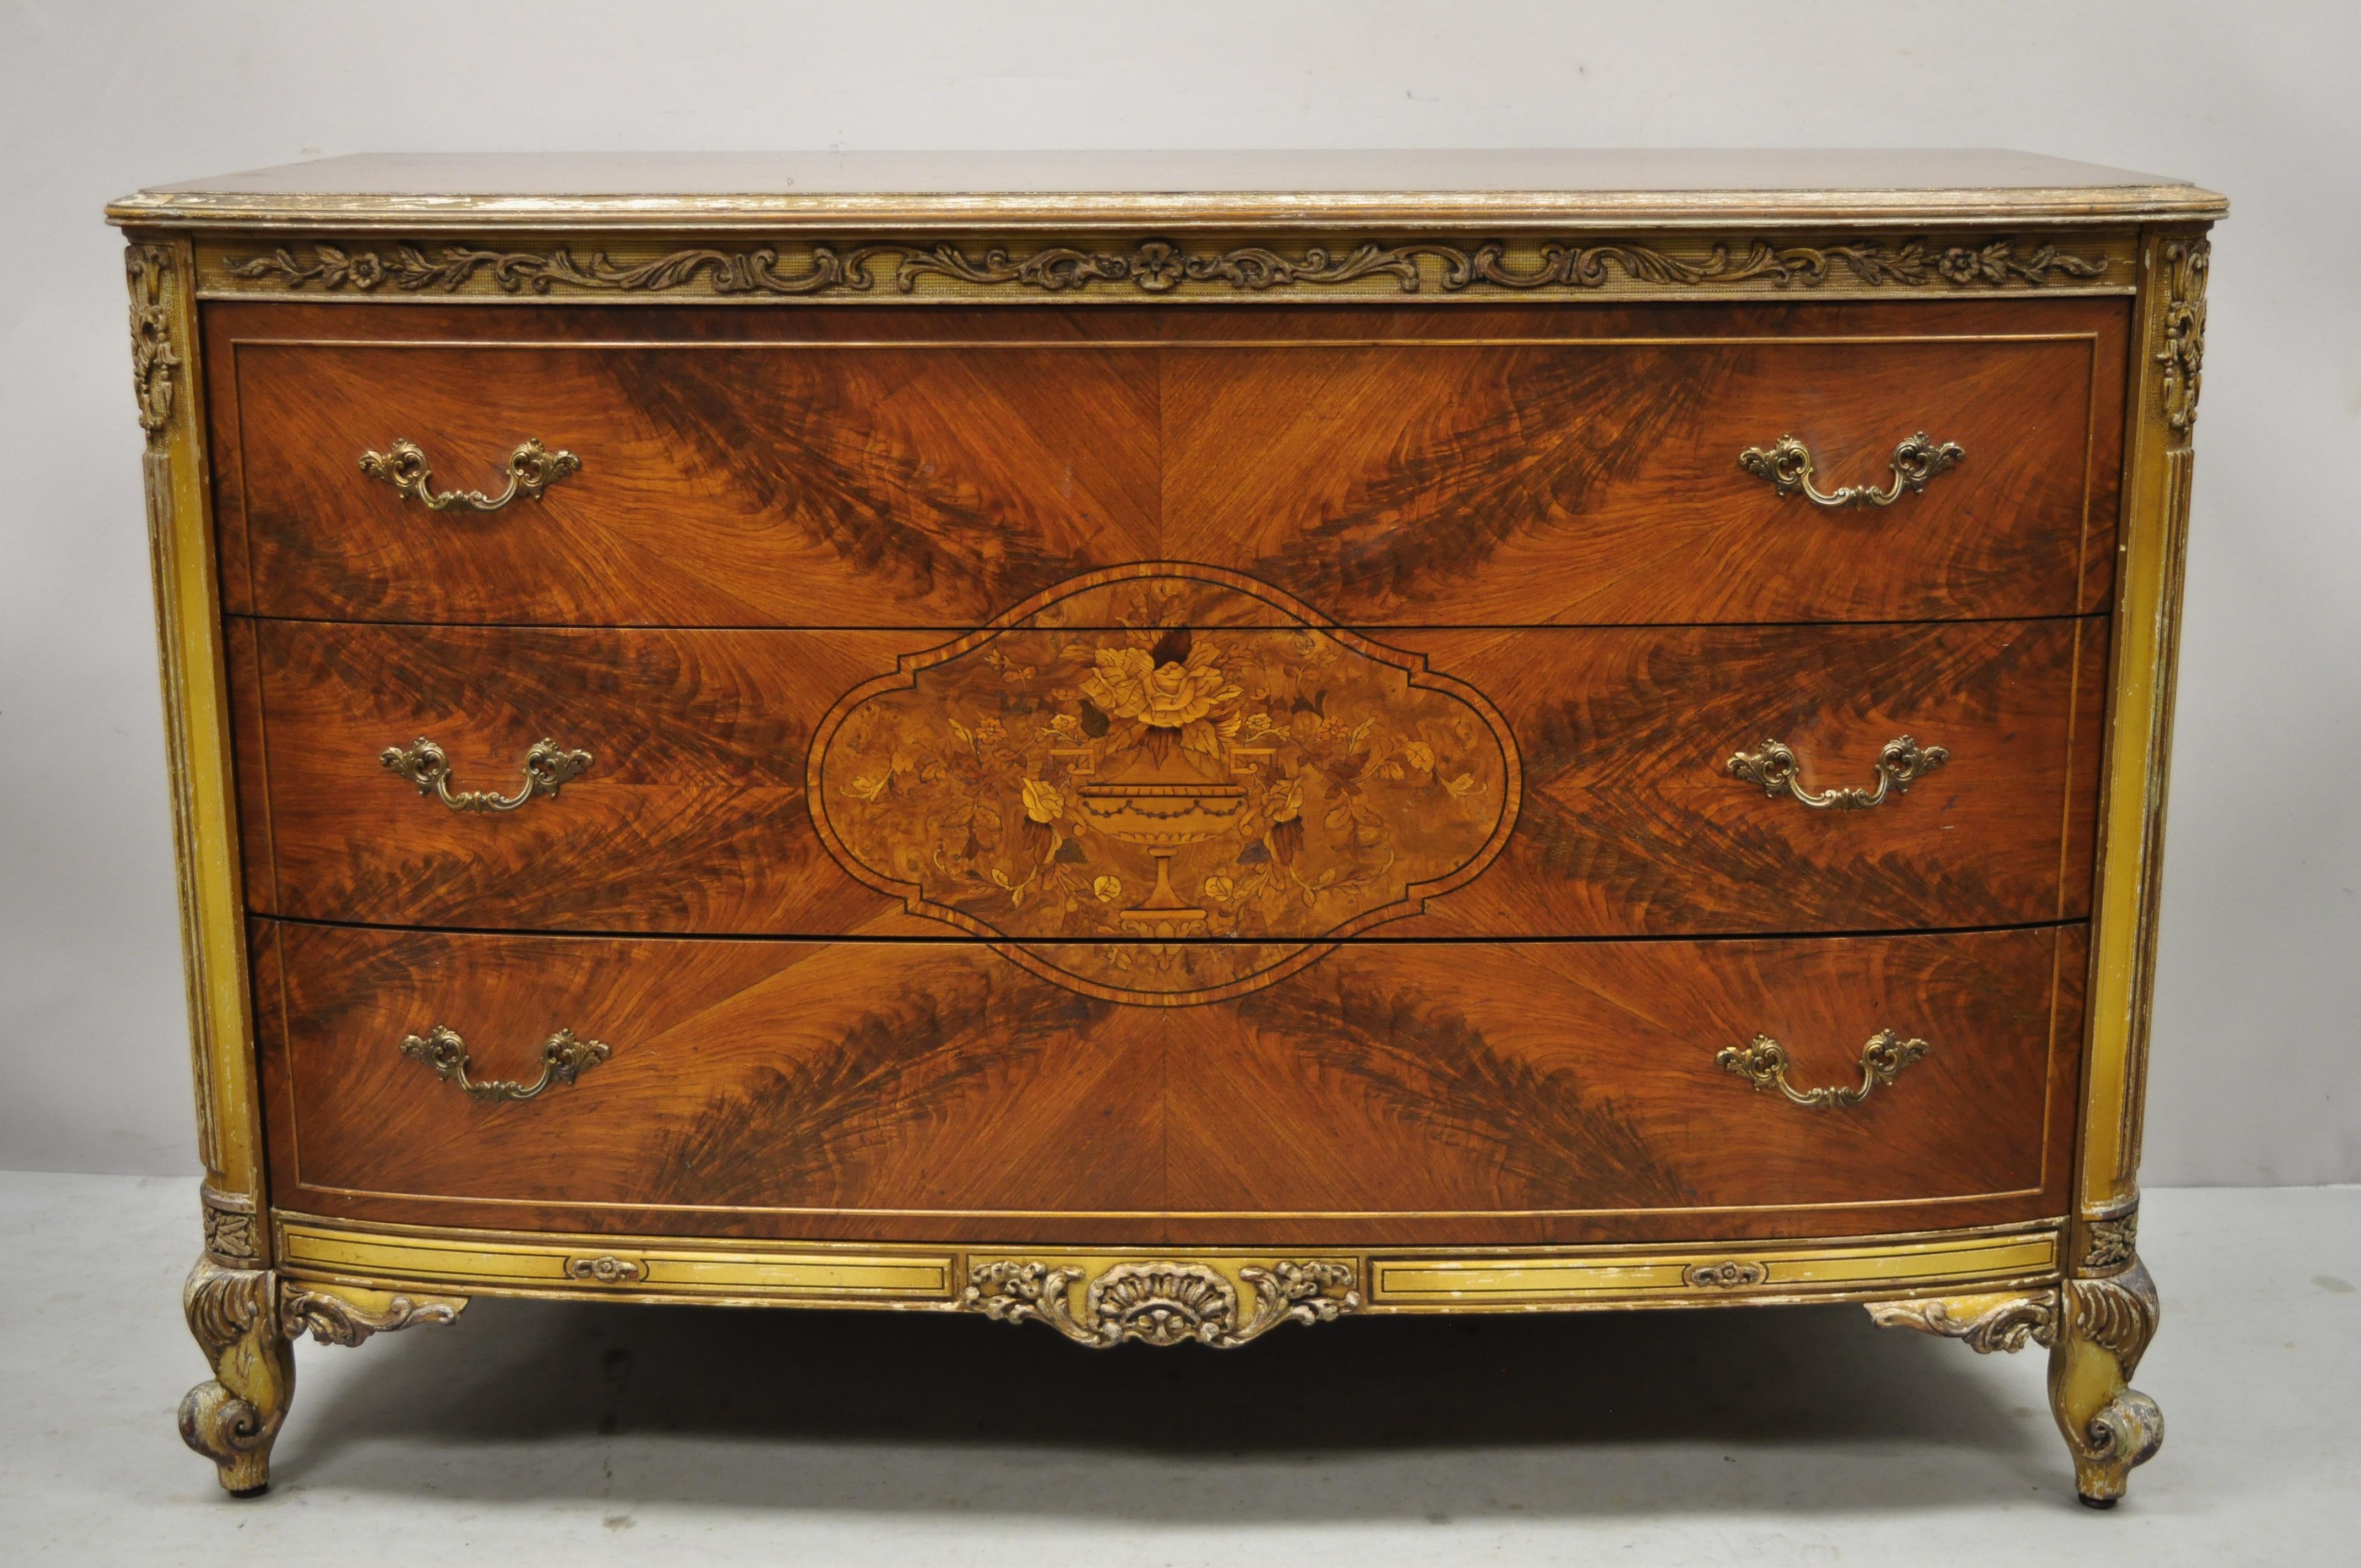 Antique French Louis XV style floral satinwood inlaid mahogany low chest dresser and mirror. Item features beautiful wood grain, distressed finish, nicely carved details, 4 dovetailed drawers, cabriole legs, great style and form. Floral carved an